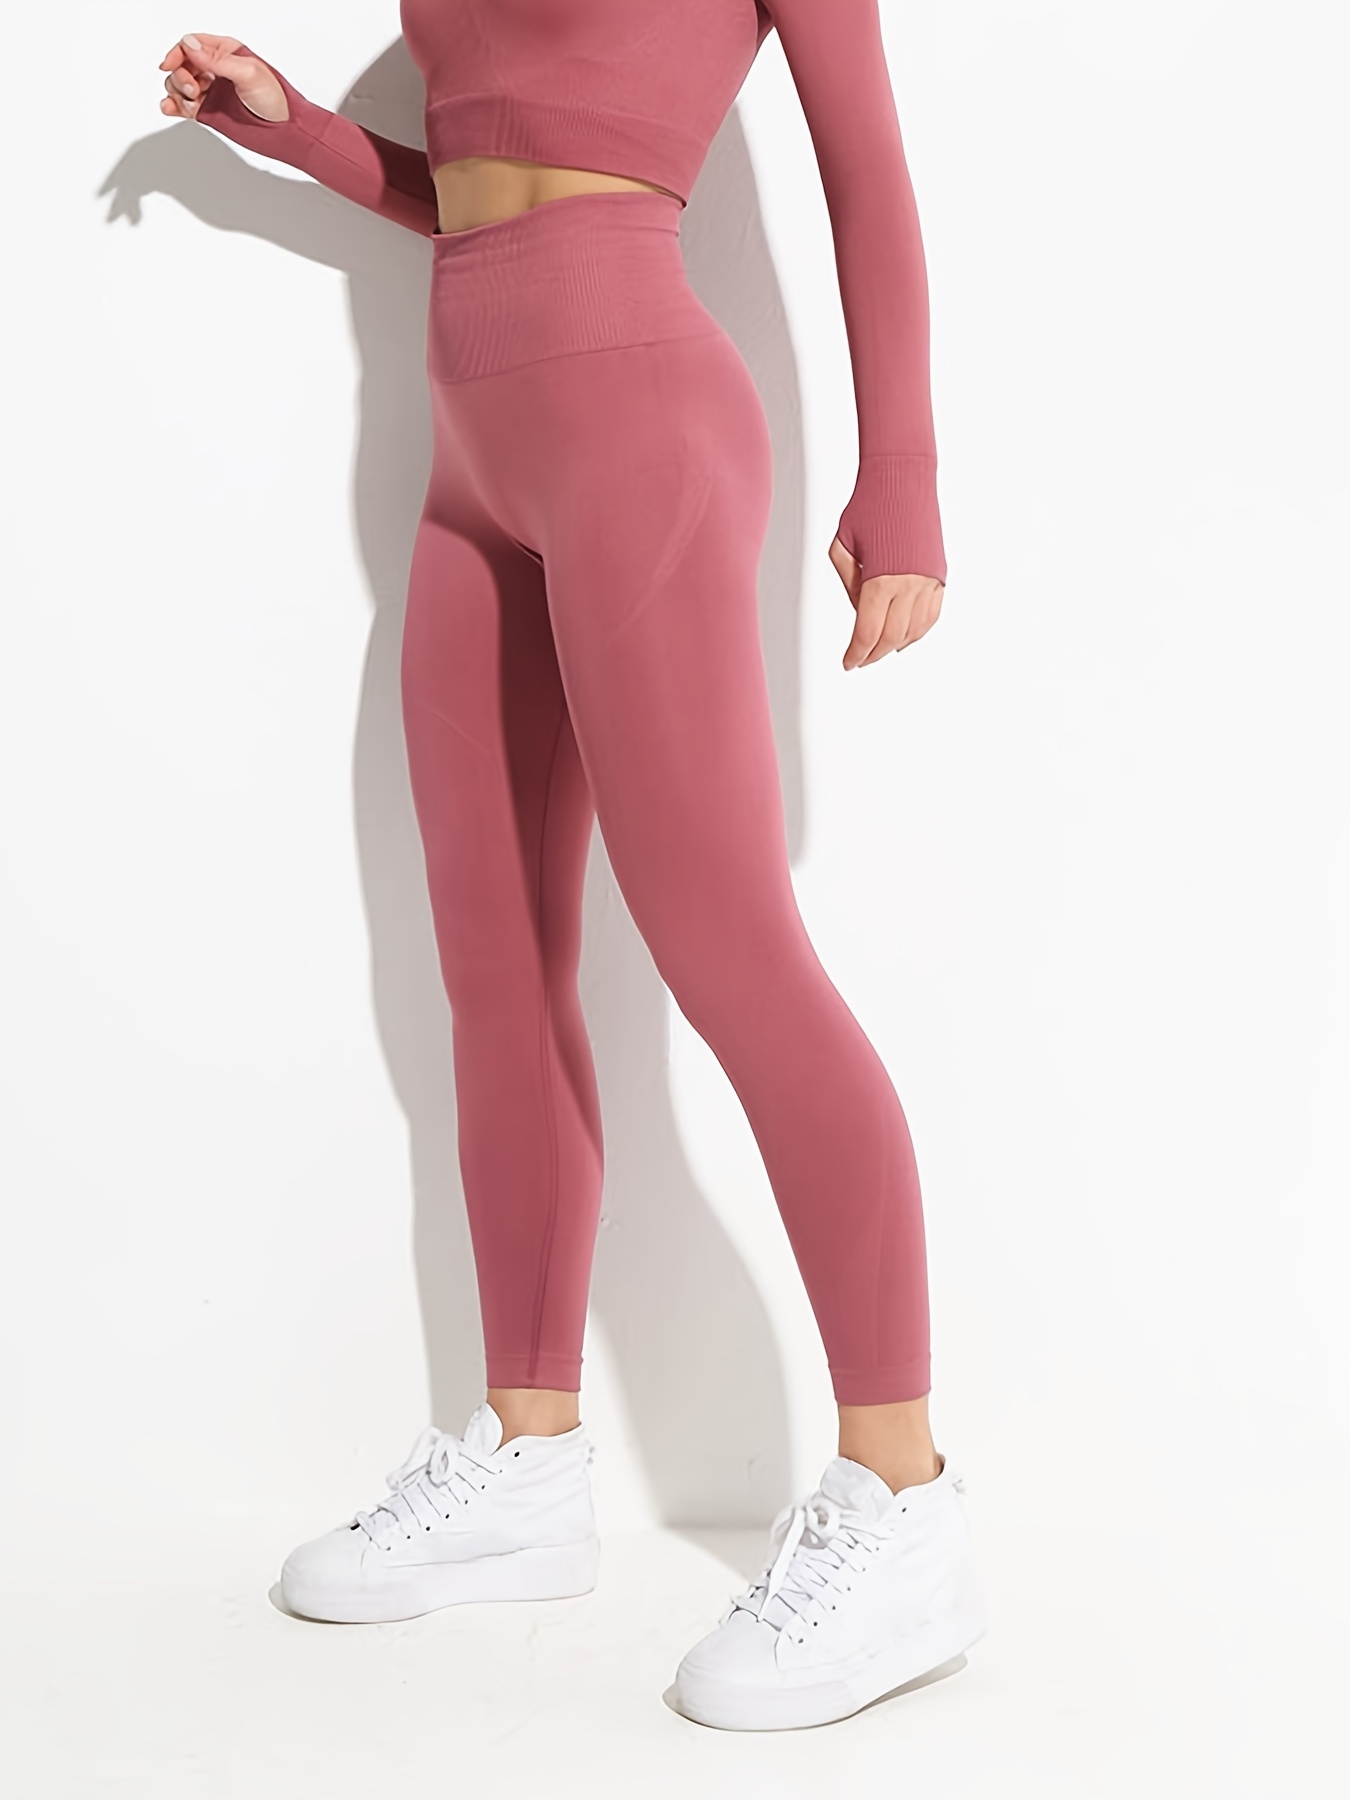 Seamless Leggings with Pockets